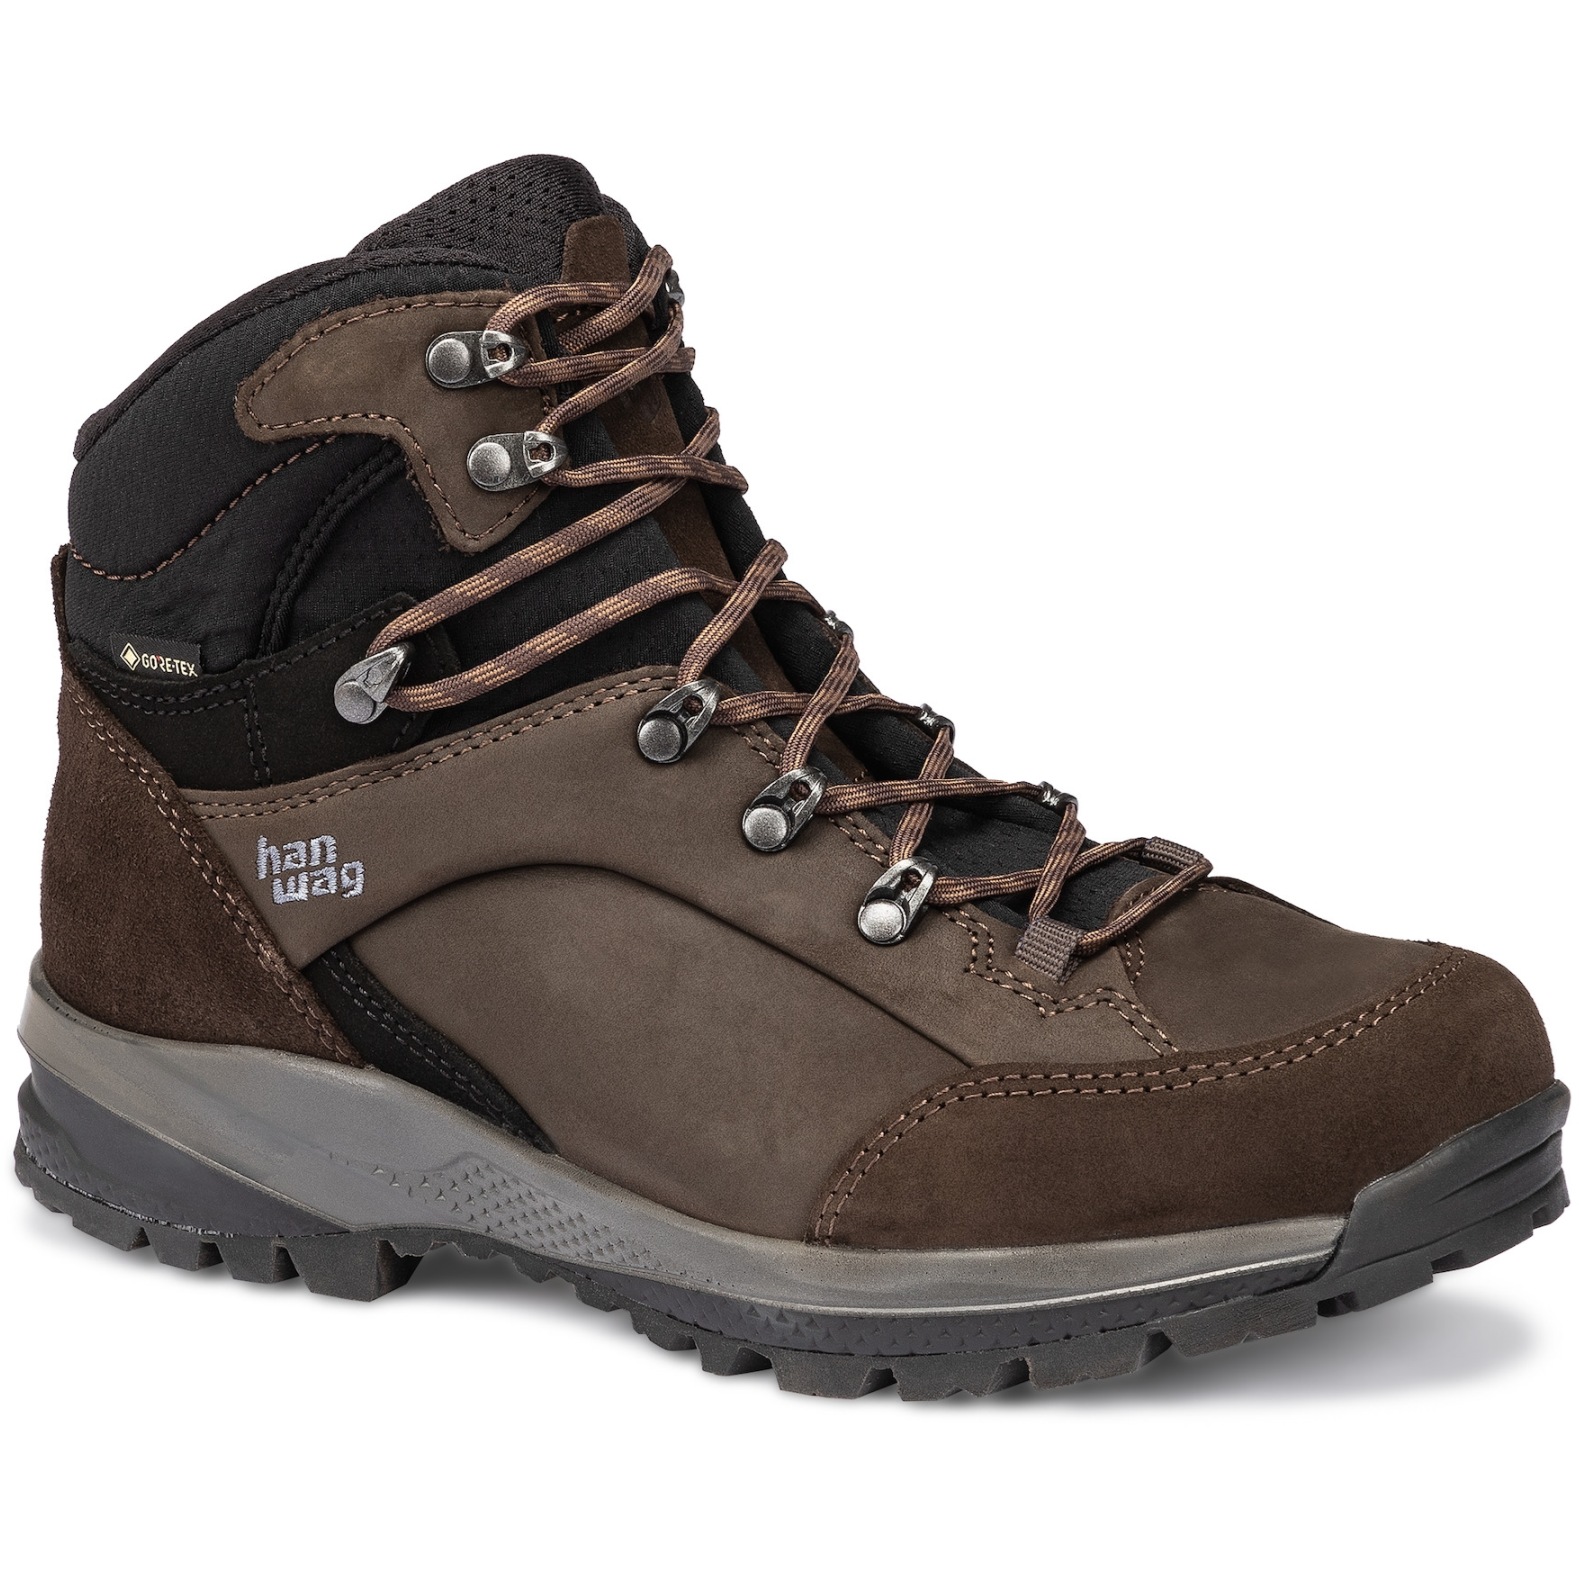 Picture of Hanwag Banks SF Extra GTX Hiking Boots Women - Mocca/Black